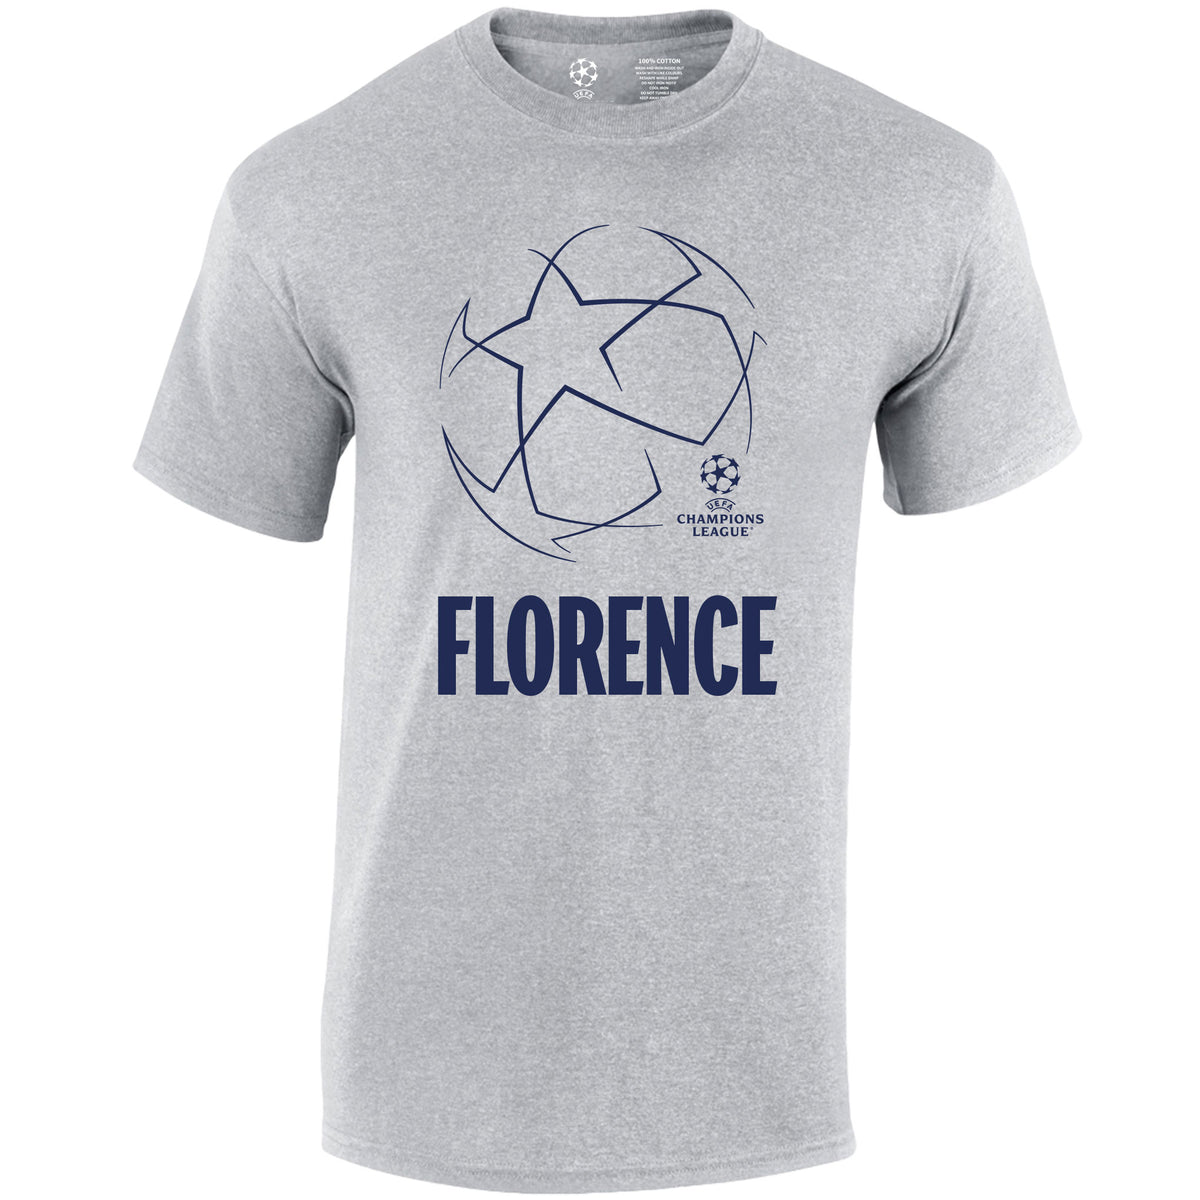 Champions League Starball Florence City T-Shirt Grey